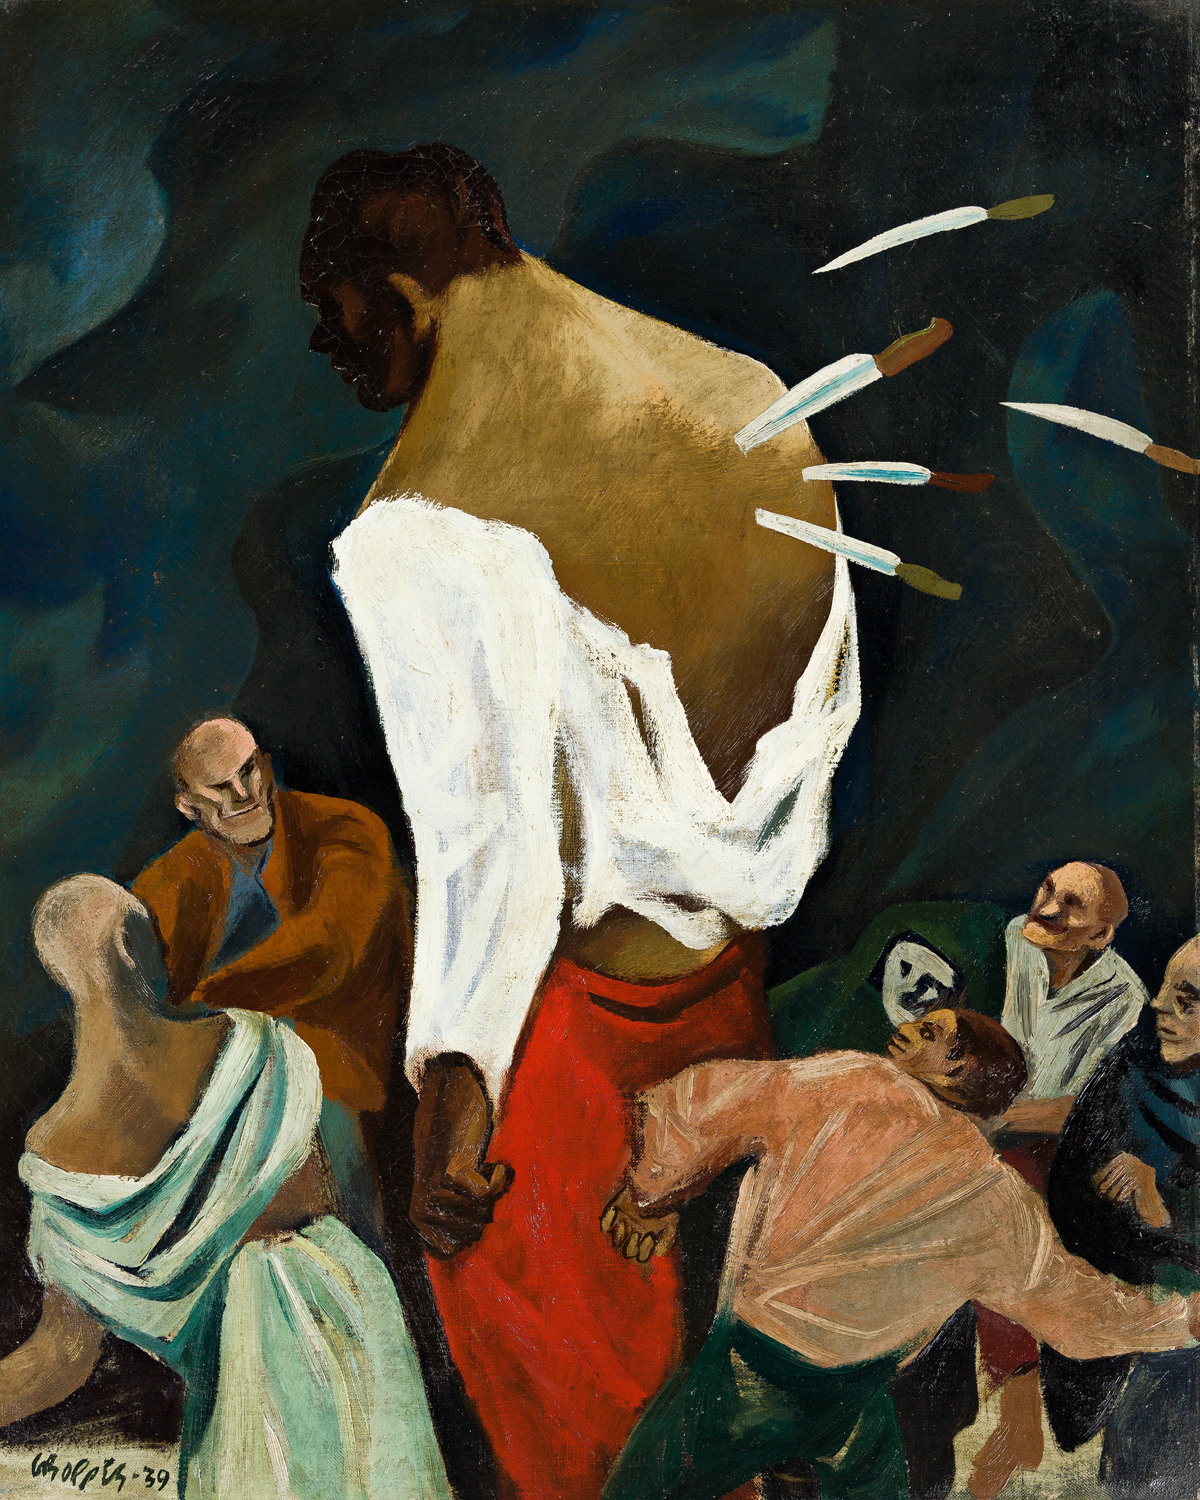 WILLIAM GROPPER (1897-1977) Stabbed in the Back.